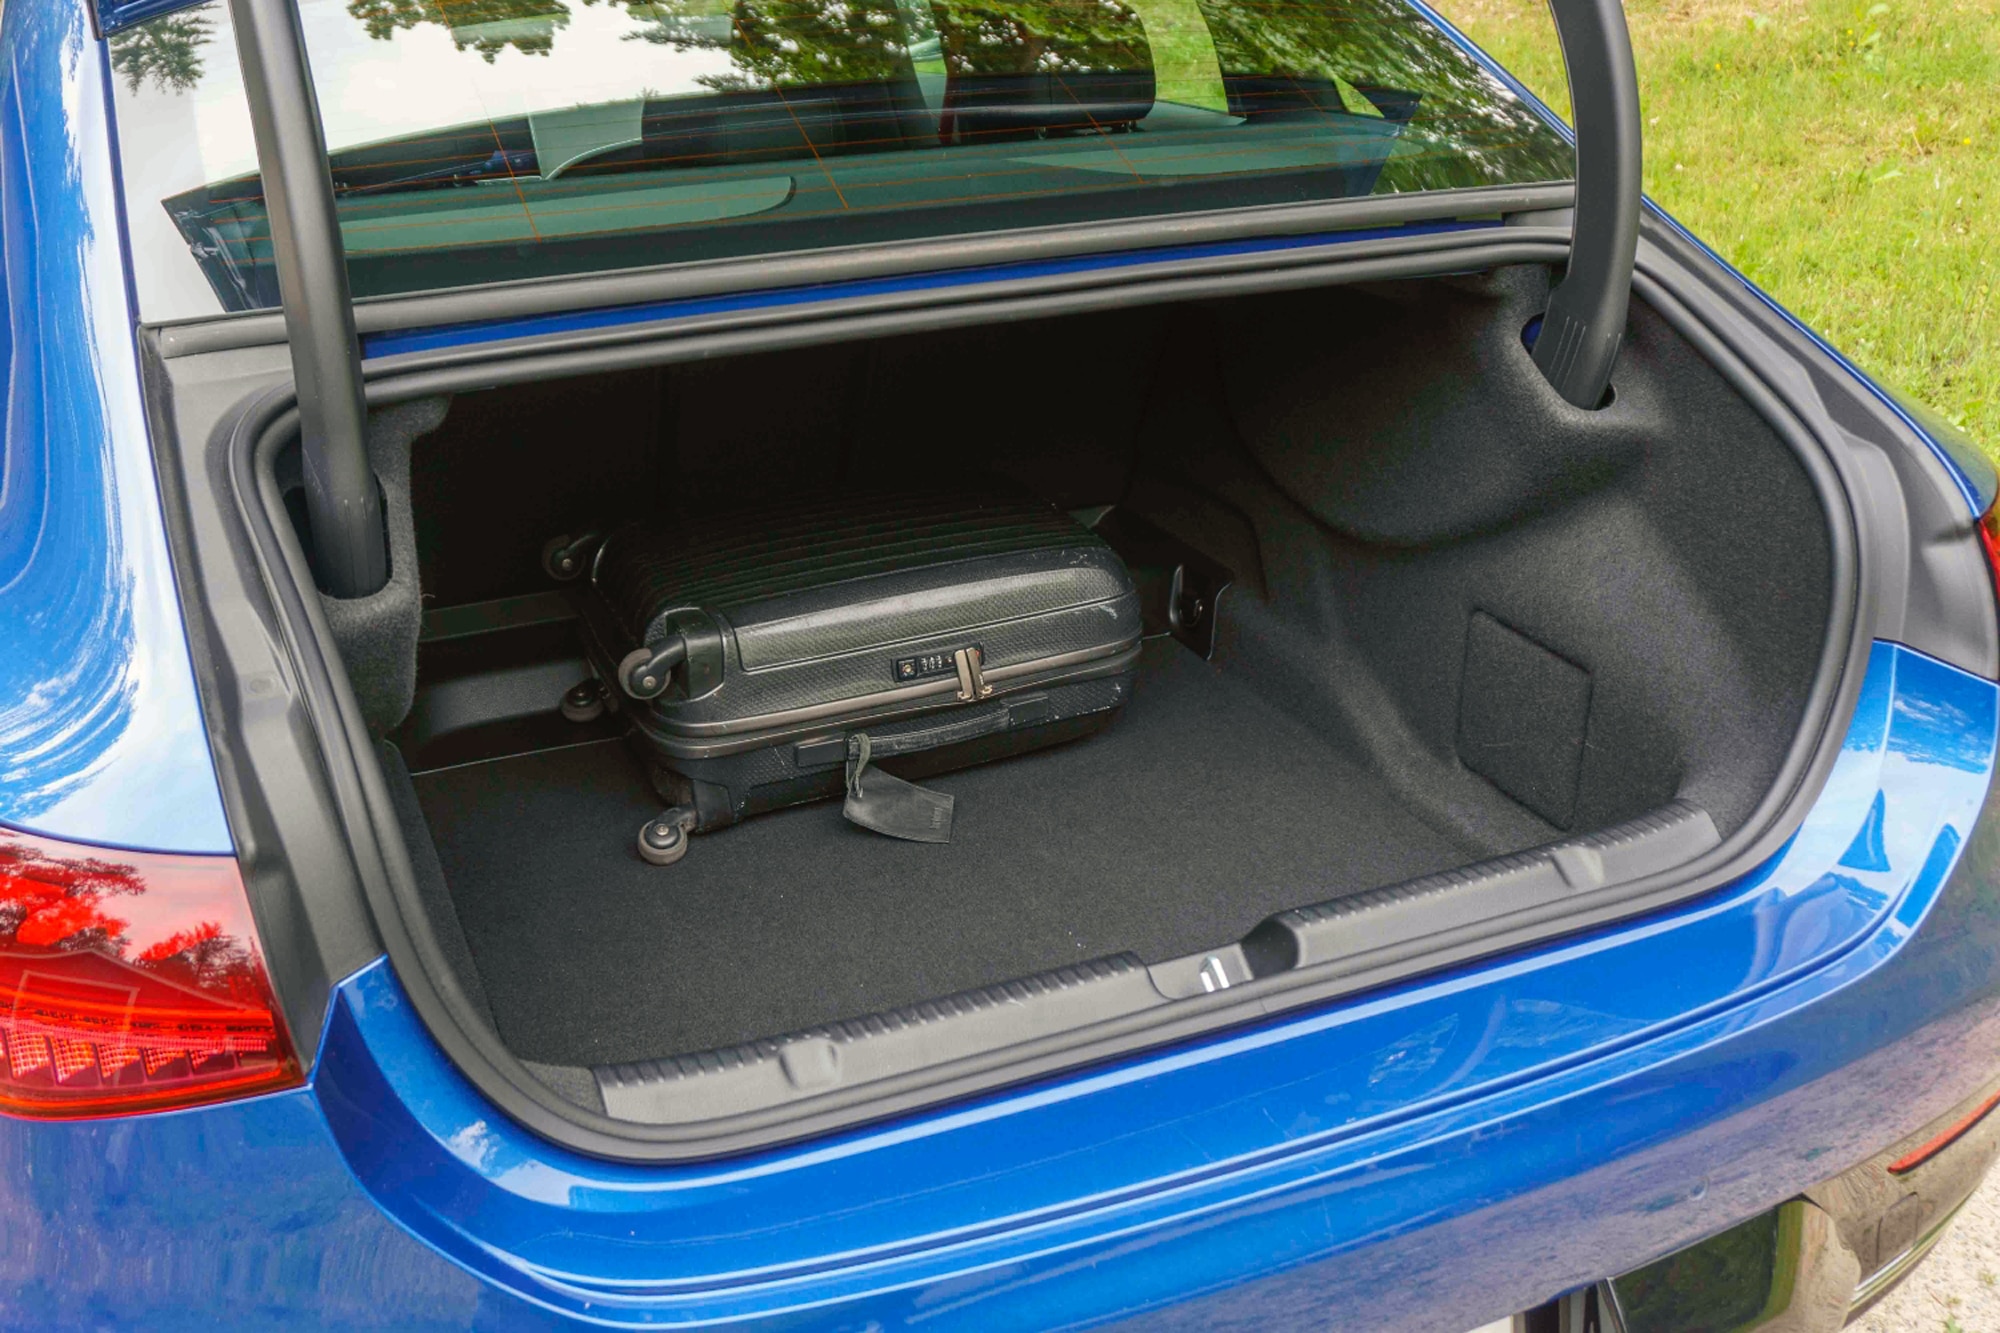 2023 Mercedes-Benz EQE Sedan in Starling Blue open cargo area with black luggage inside